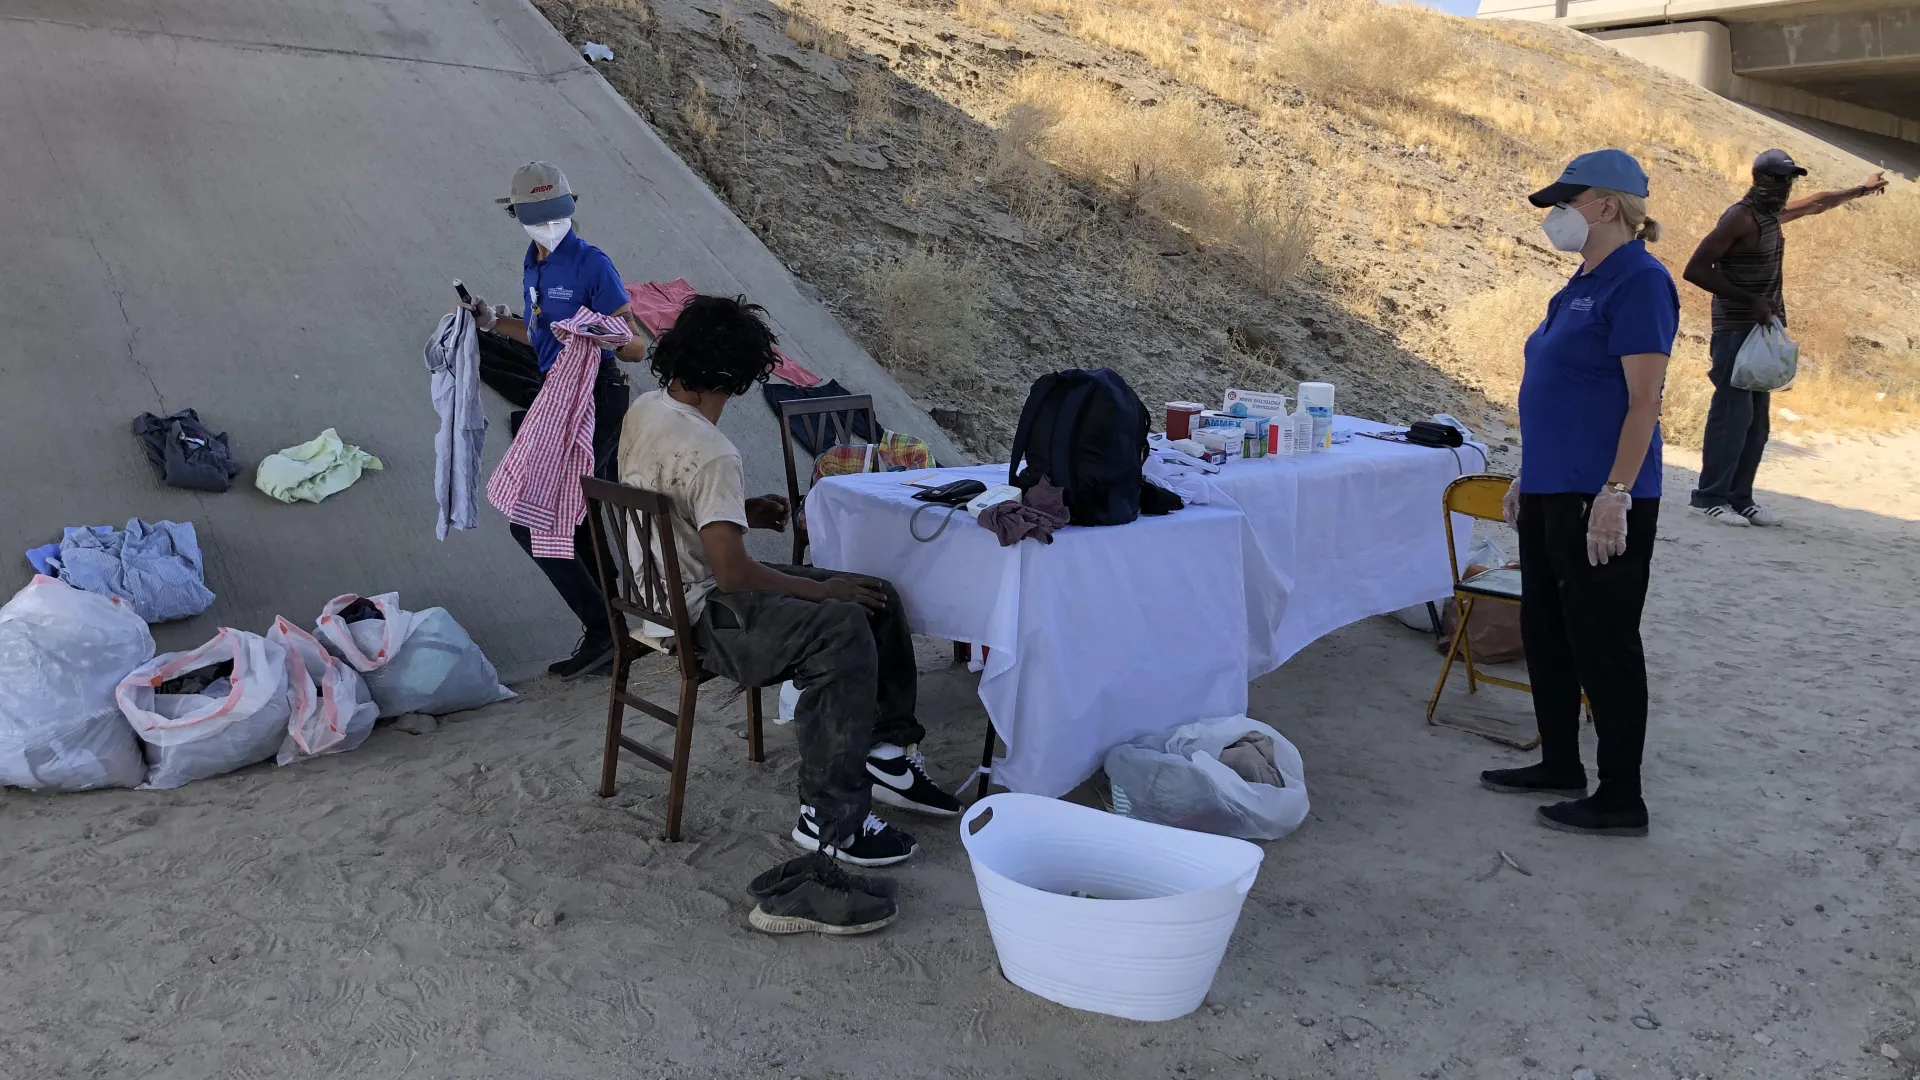 Cal State San Bernardino’s Palm Desert Campus has been providing free healthcare services for homeless and unsheltered people.